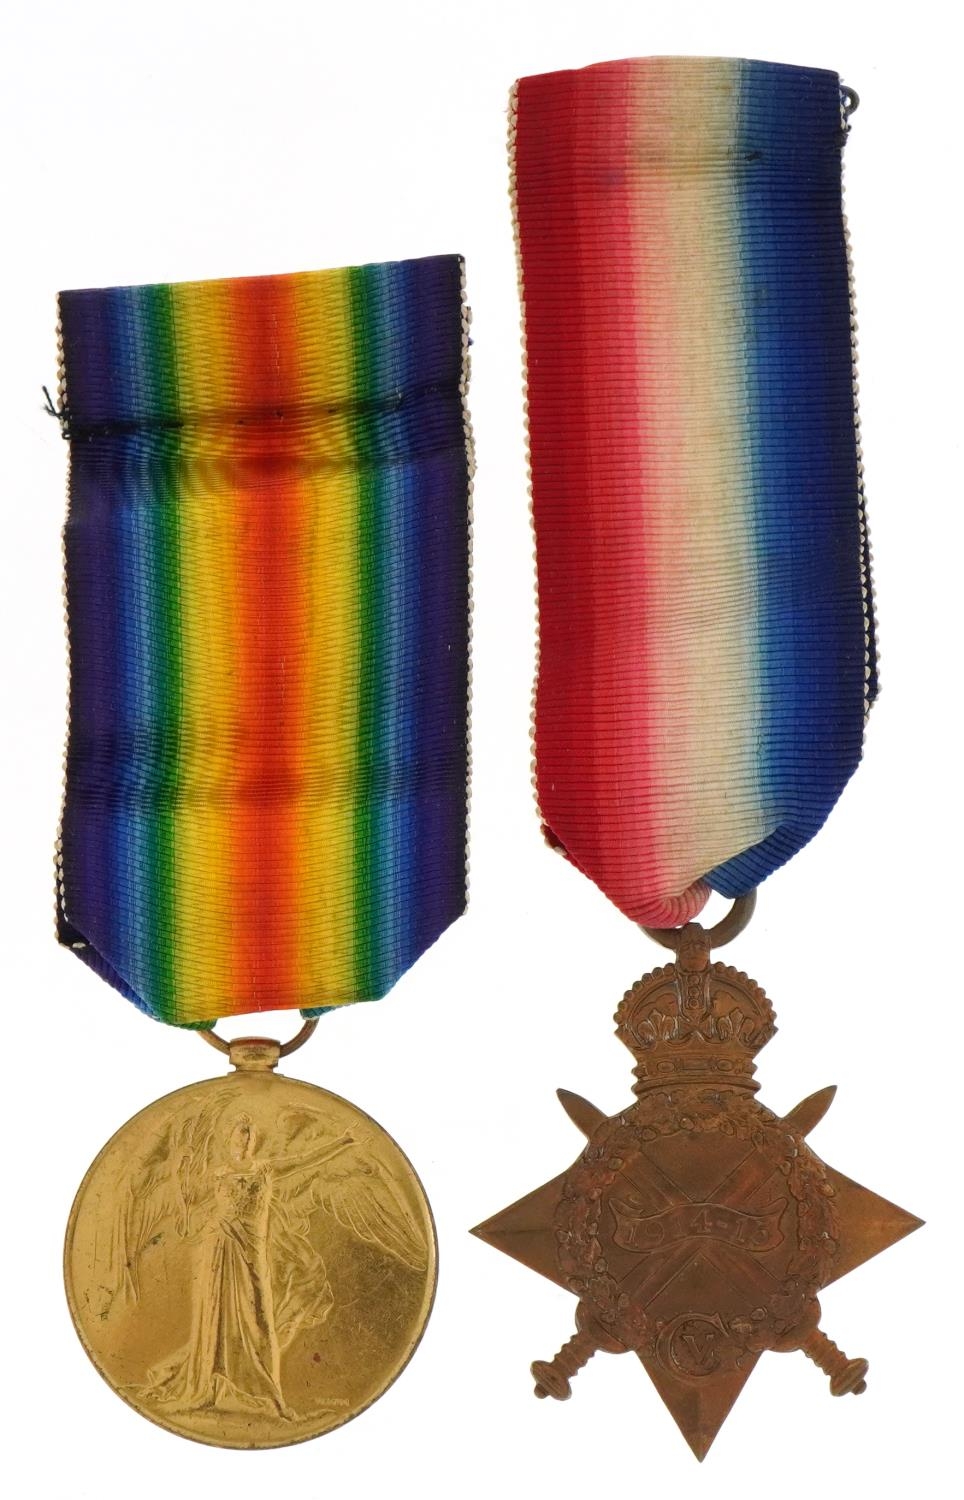 British military World War I medals comprising Victory medal and 1914-1915 star awarded to PS-3857. - Image 2 of 4